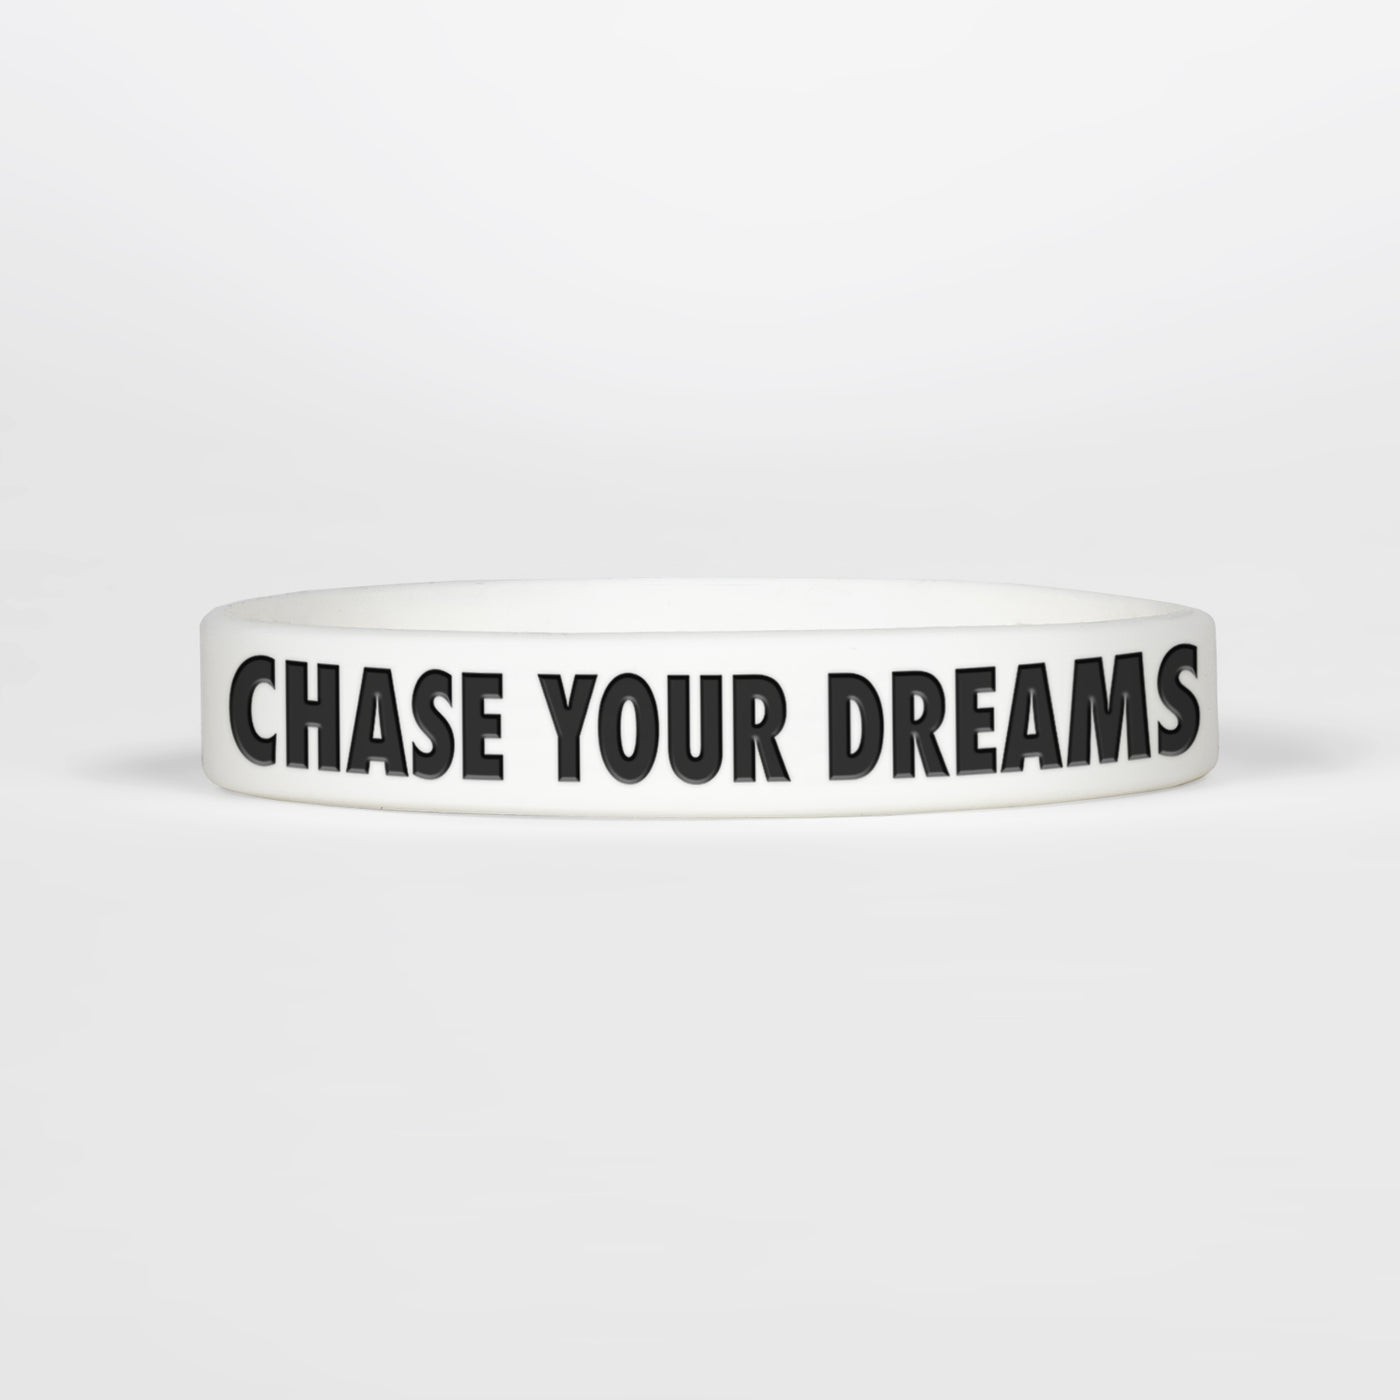 Chase Your Dreams Motivational Wristband